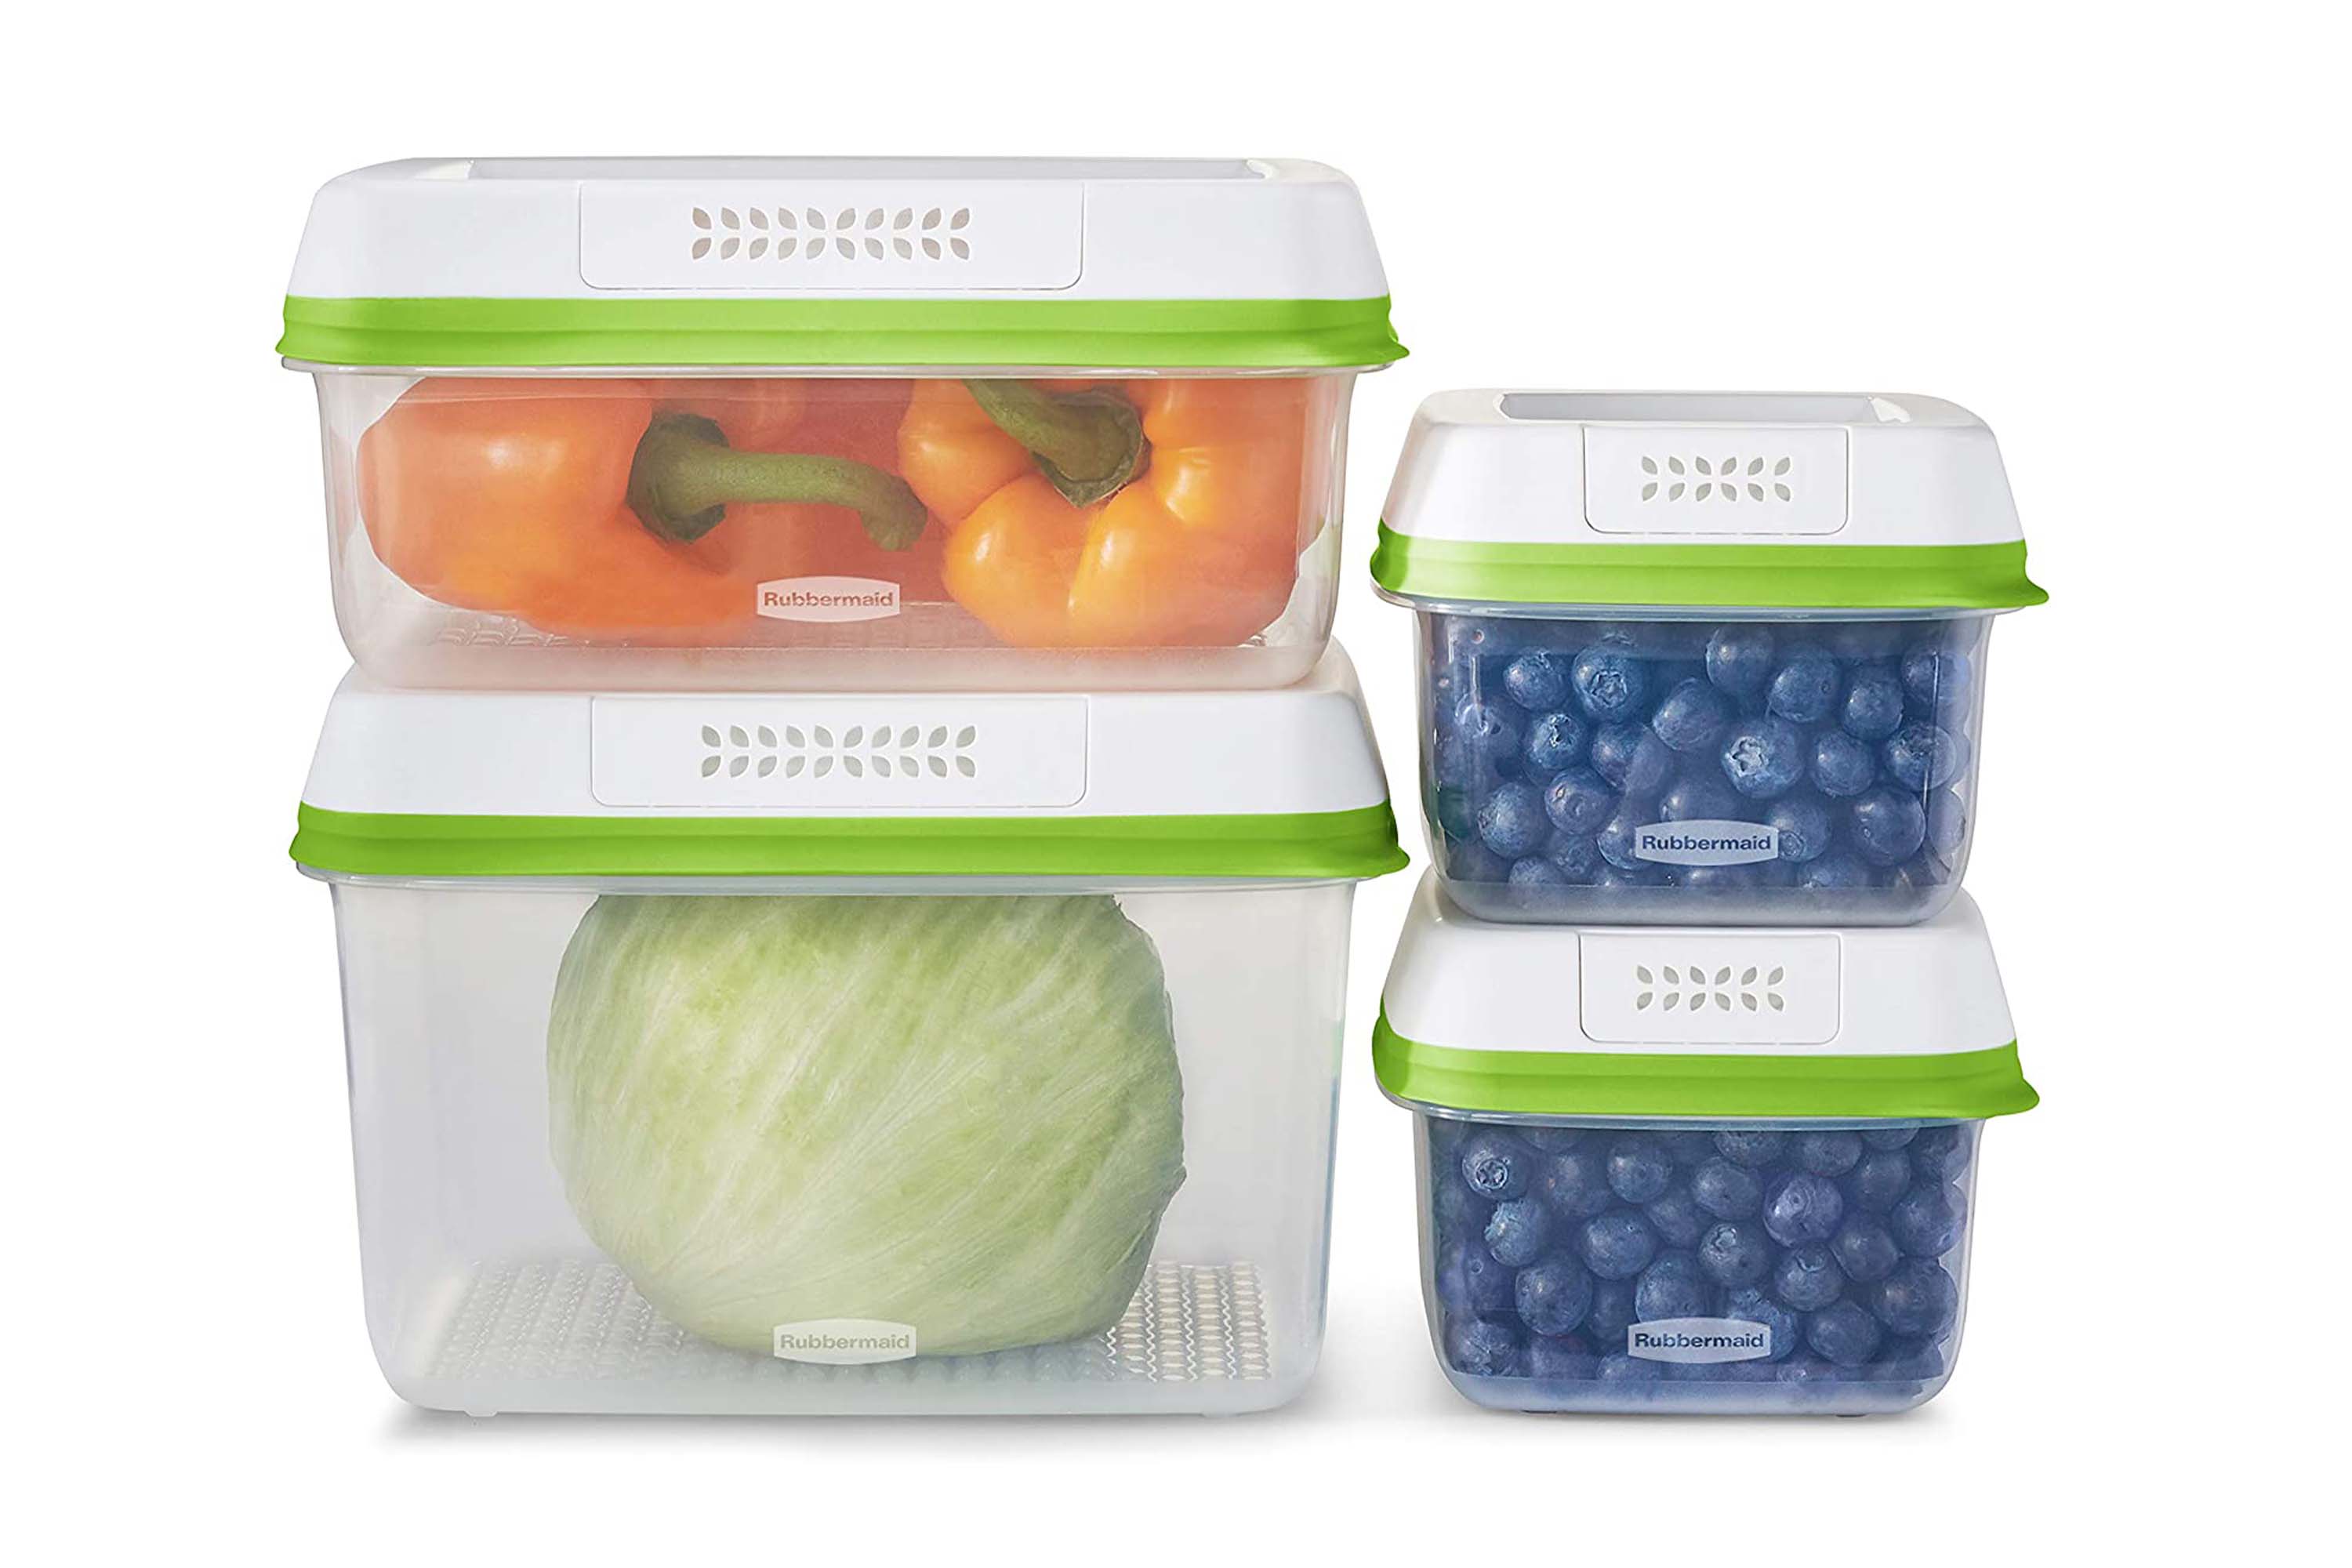  Utensilux Rubbermaid Premier Extra Large Size Container Bundle  Set One Each Of, 9 Cup and 14 Cup Premier Flex & Seal Food Storage Set,  Tritan Containers, Grey Flex and Seal Lids